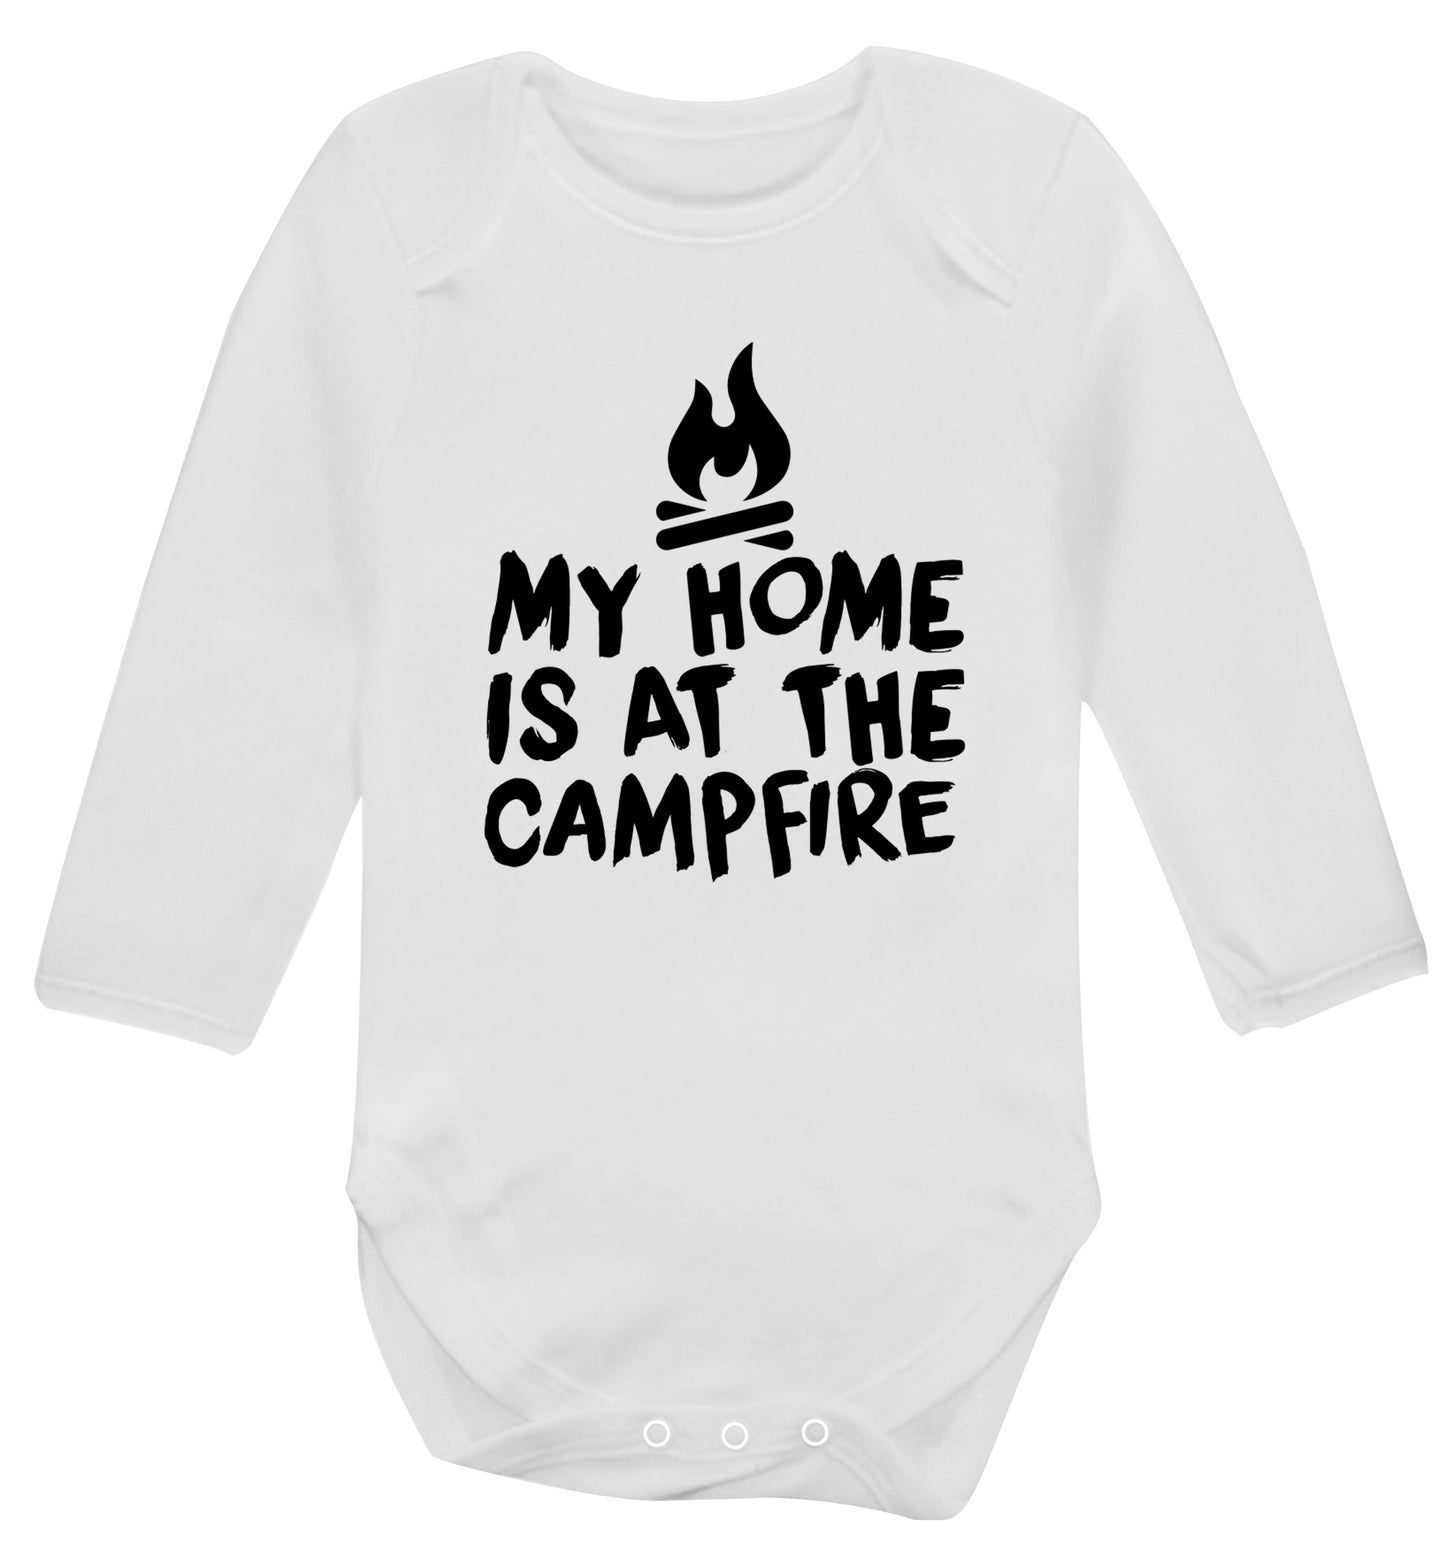 My home is at the campfire Baby Vest long sleeved white 6-12 months